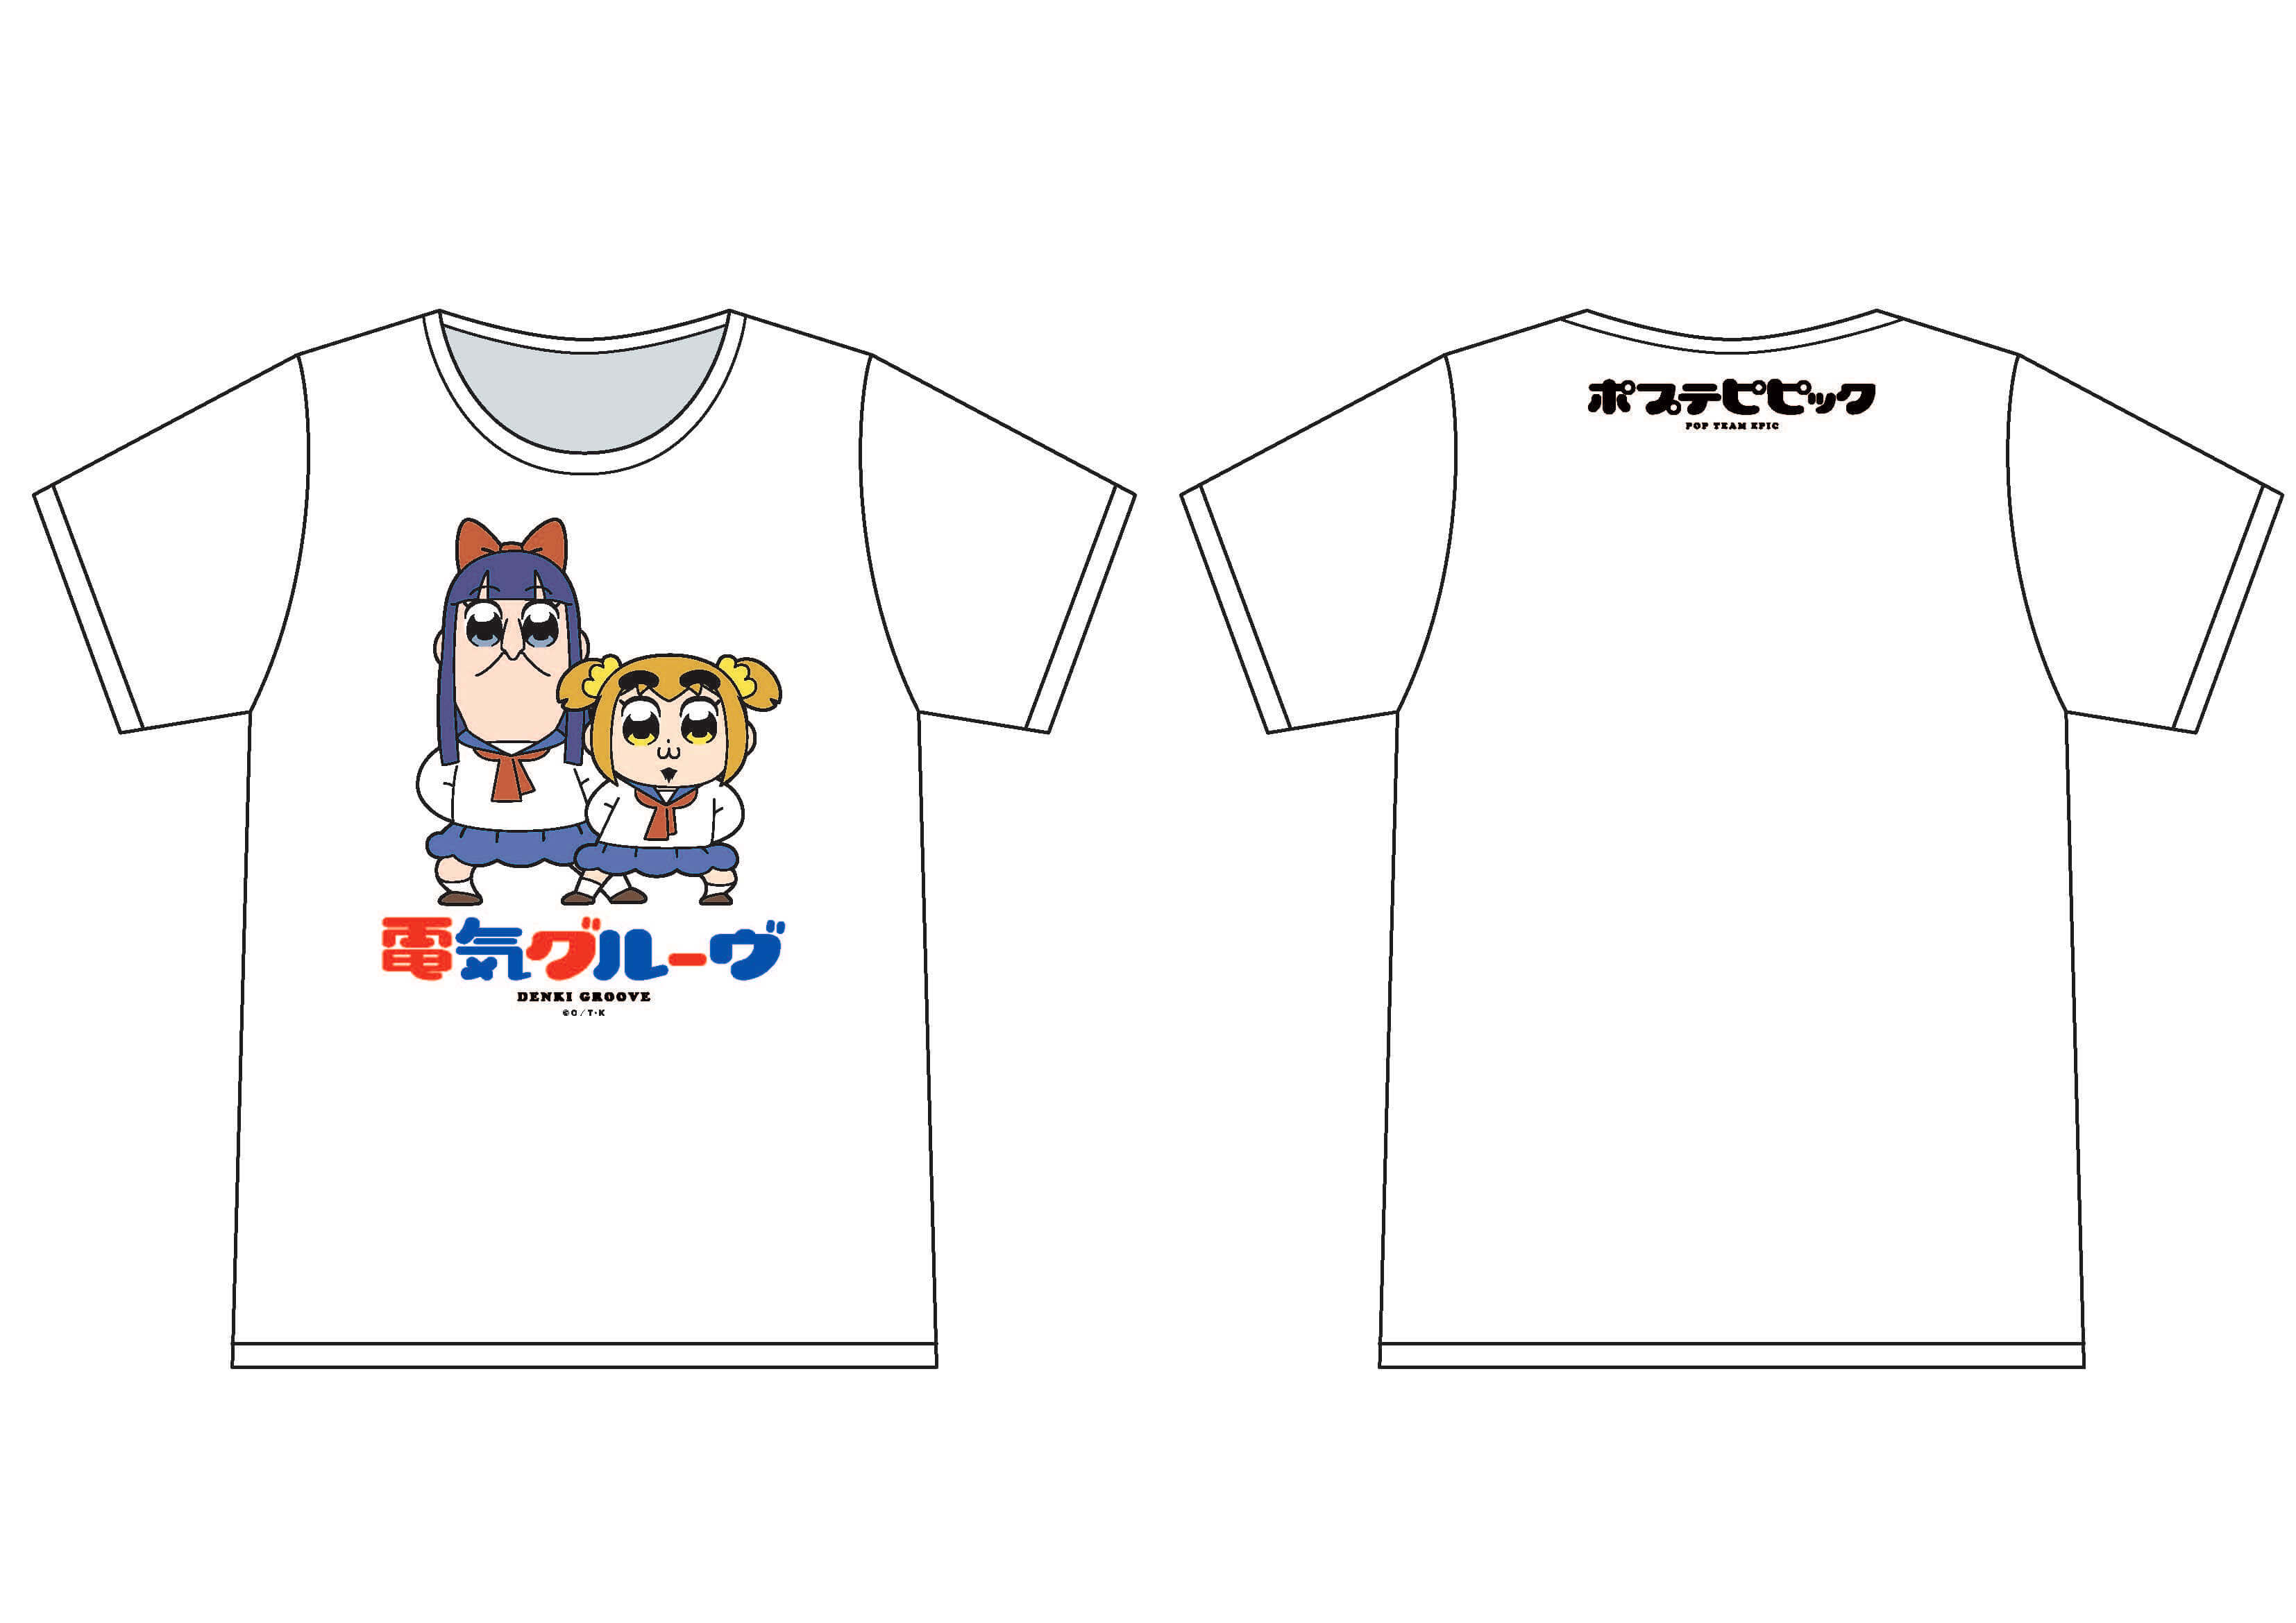 A collaborative T-shirt of Denki Groove×Poptepipic will be sold.